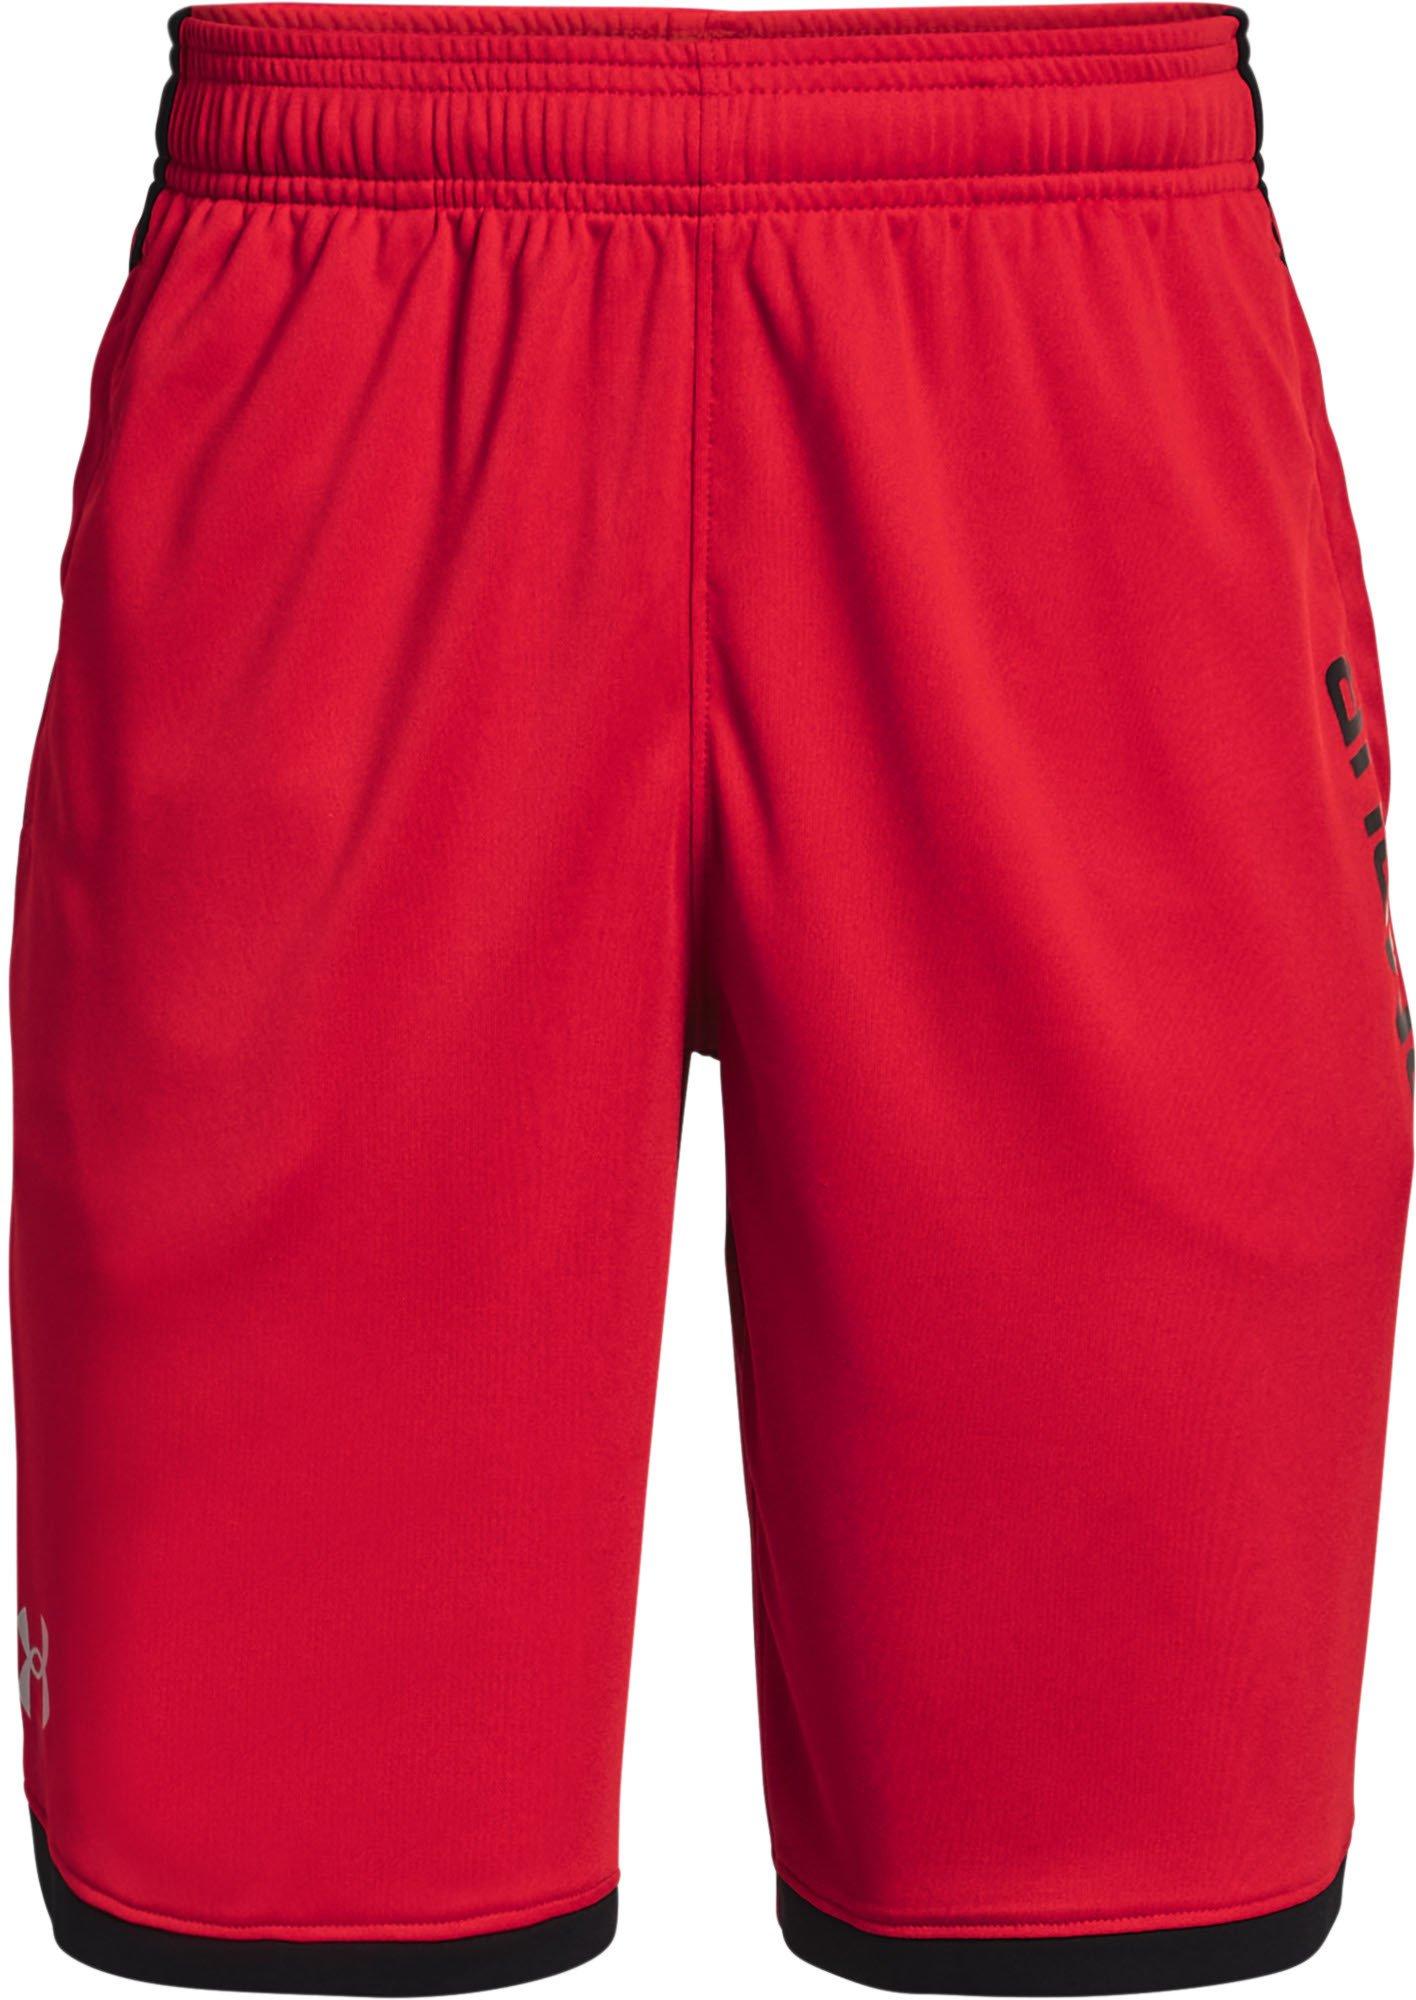 Under Armour Stunt 3.0 Shorts-RED L